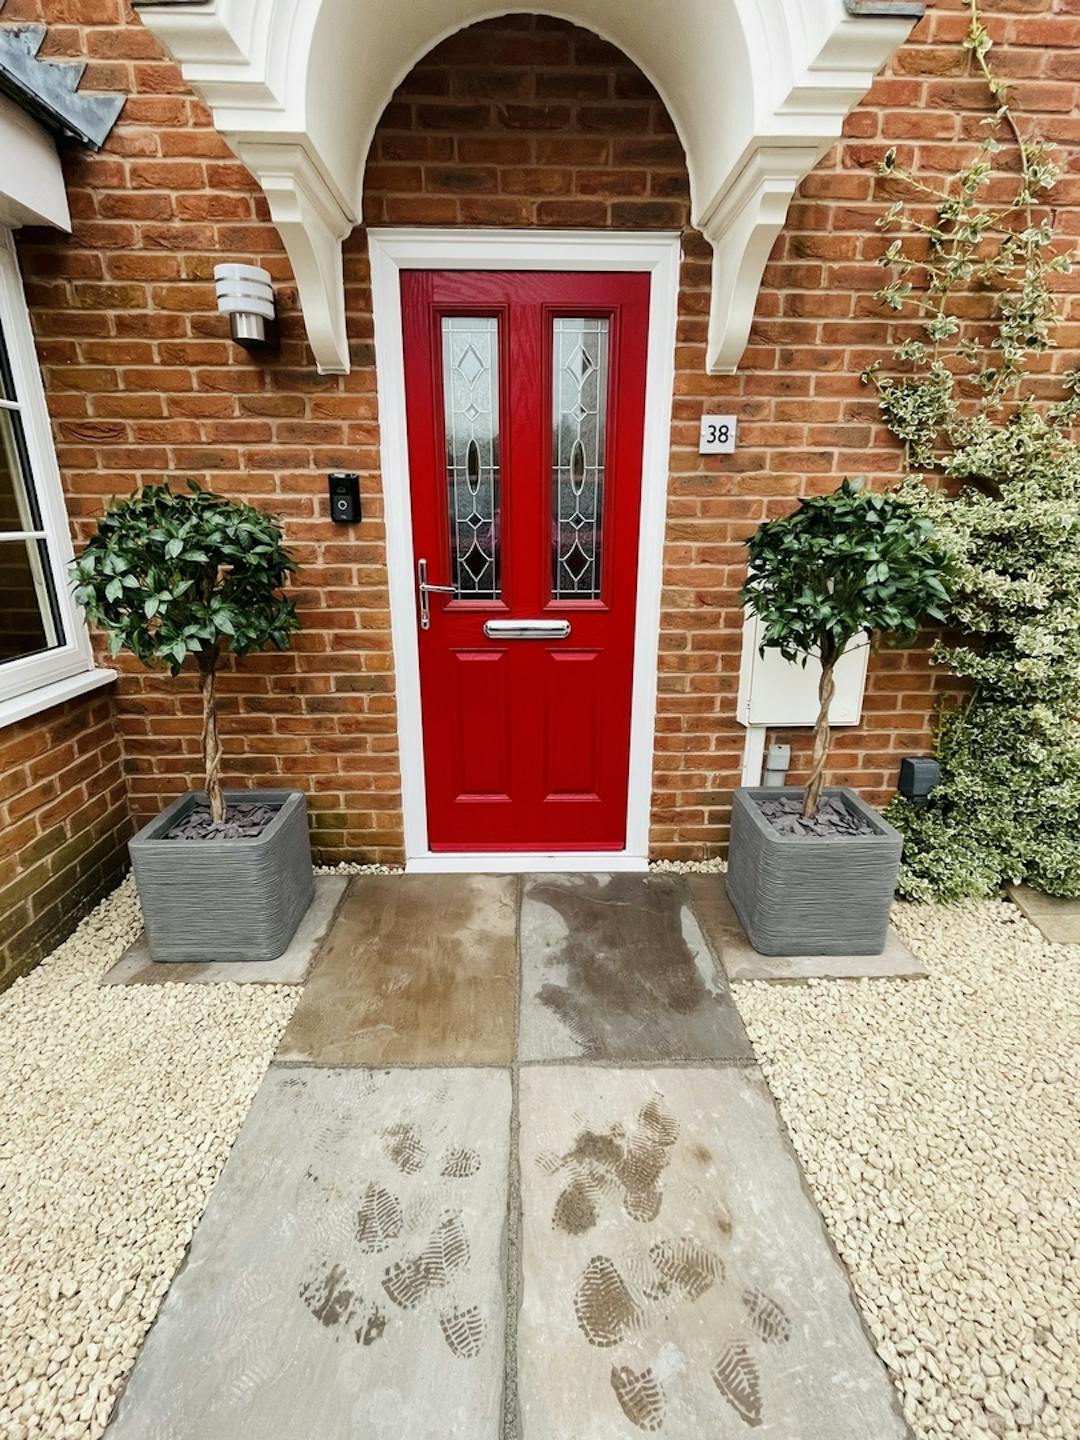 Artificial bay laurel trees either side of a red front door of house